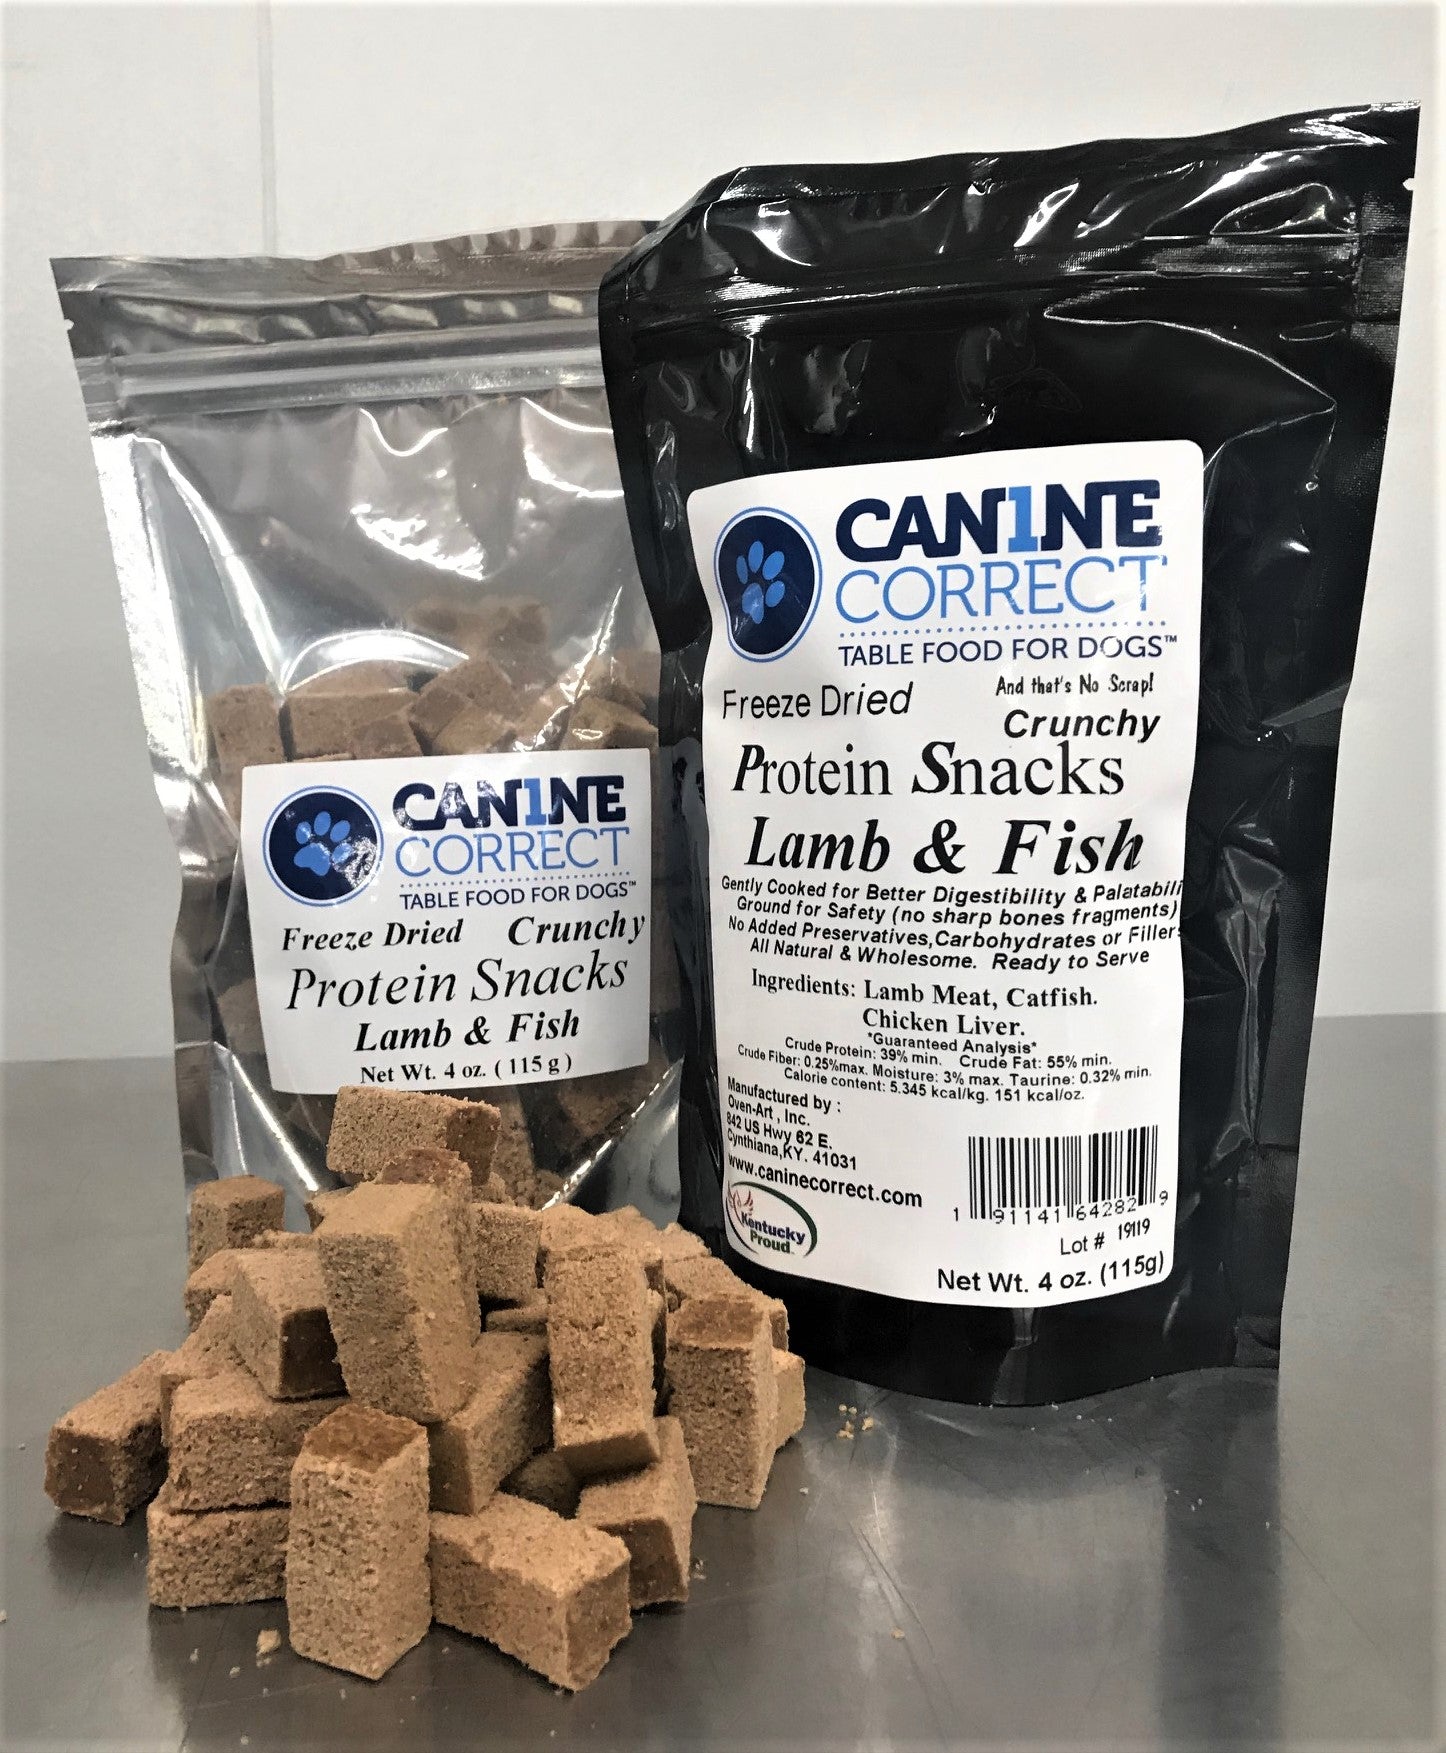 Canine Correct Protein Snacks